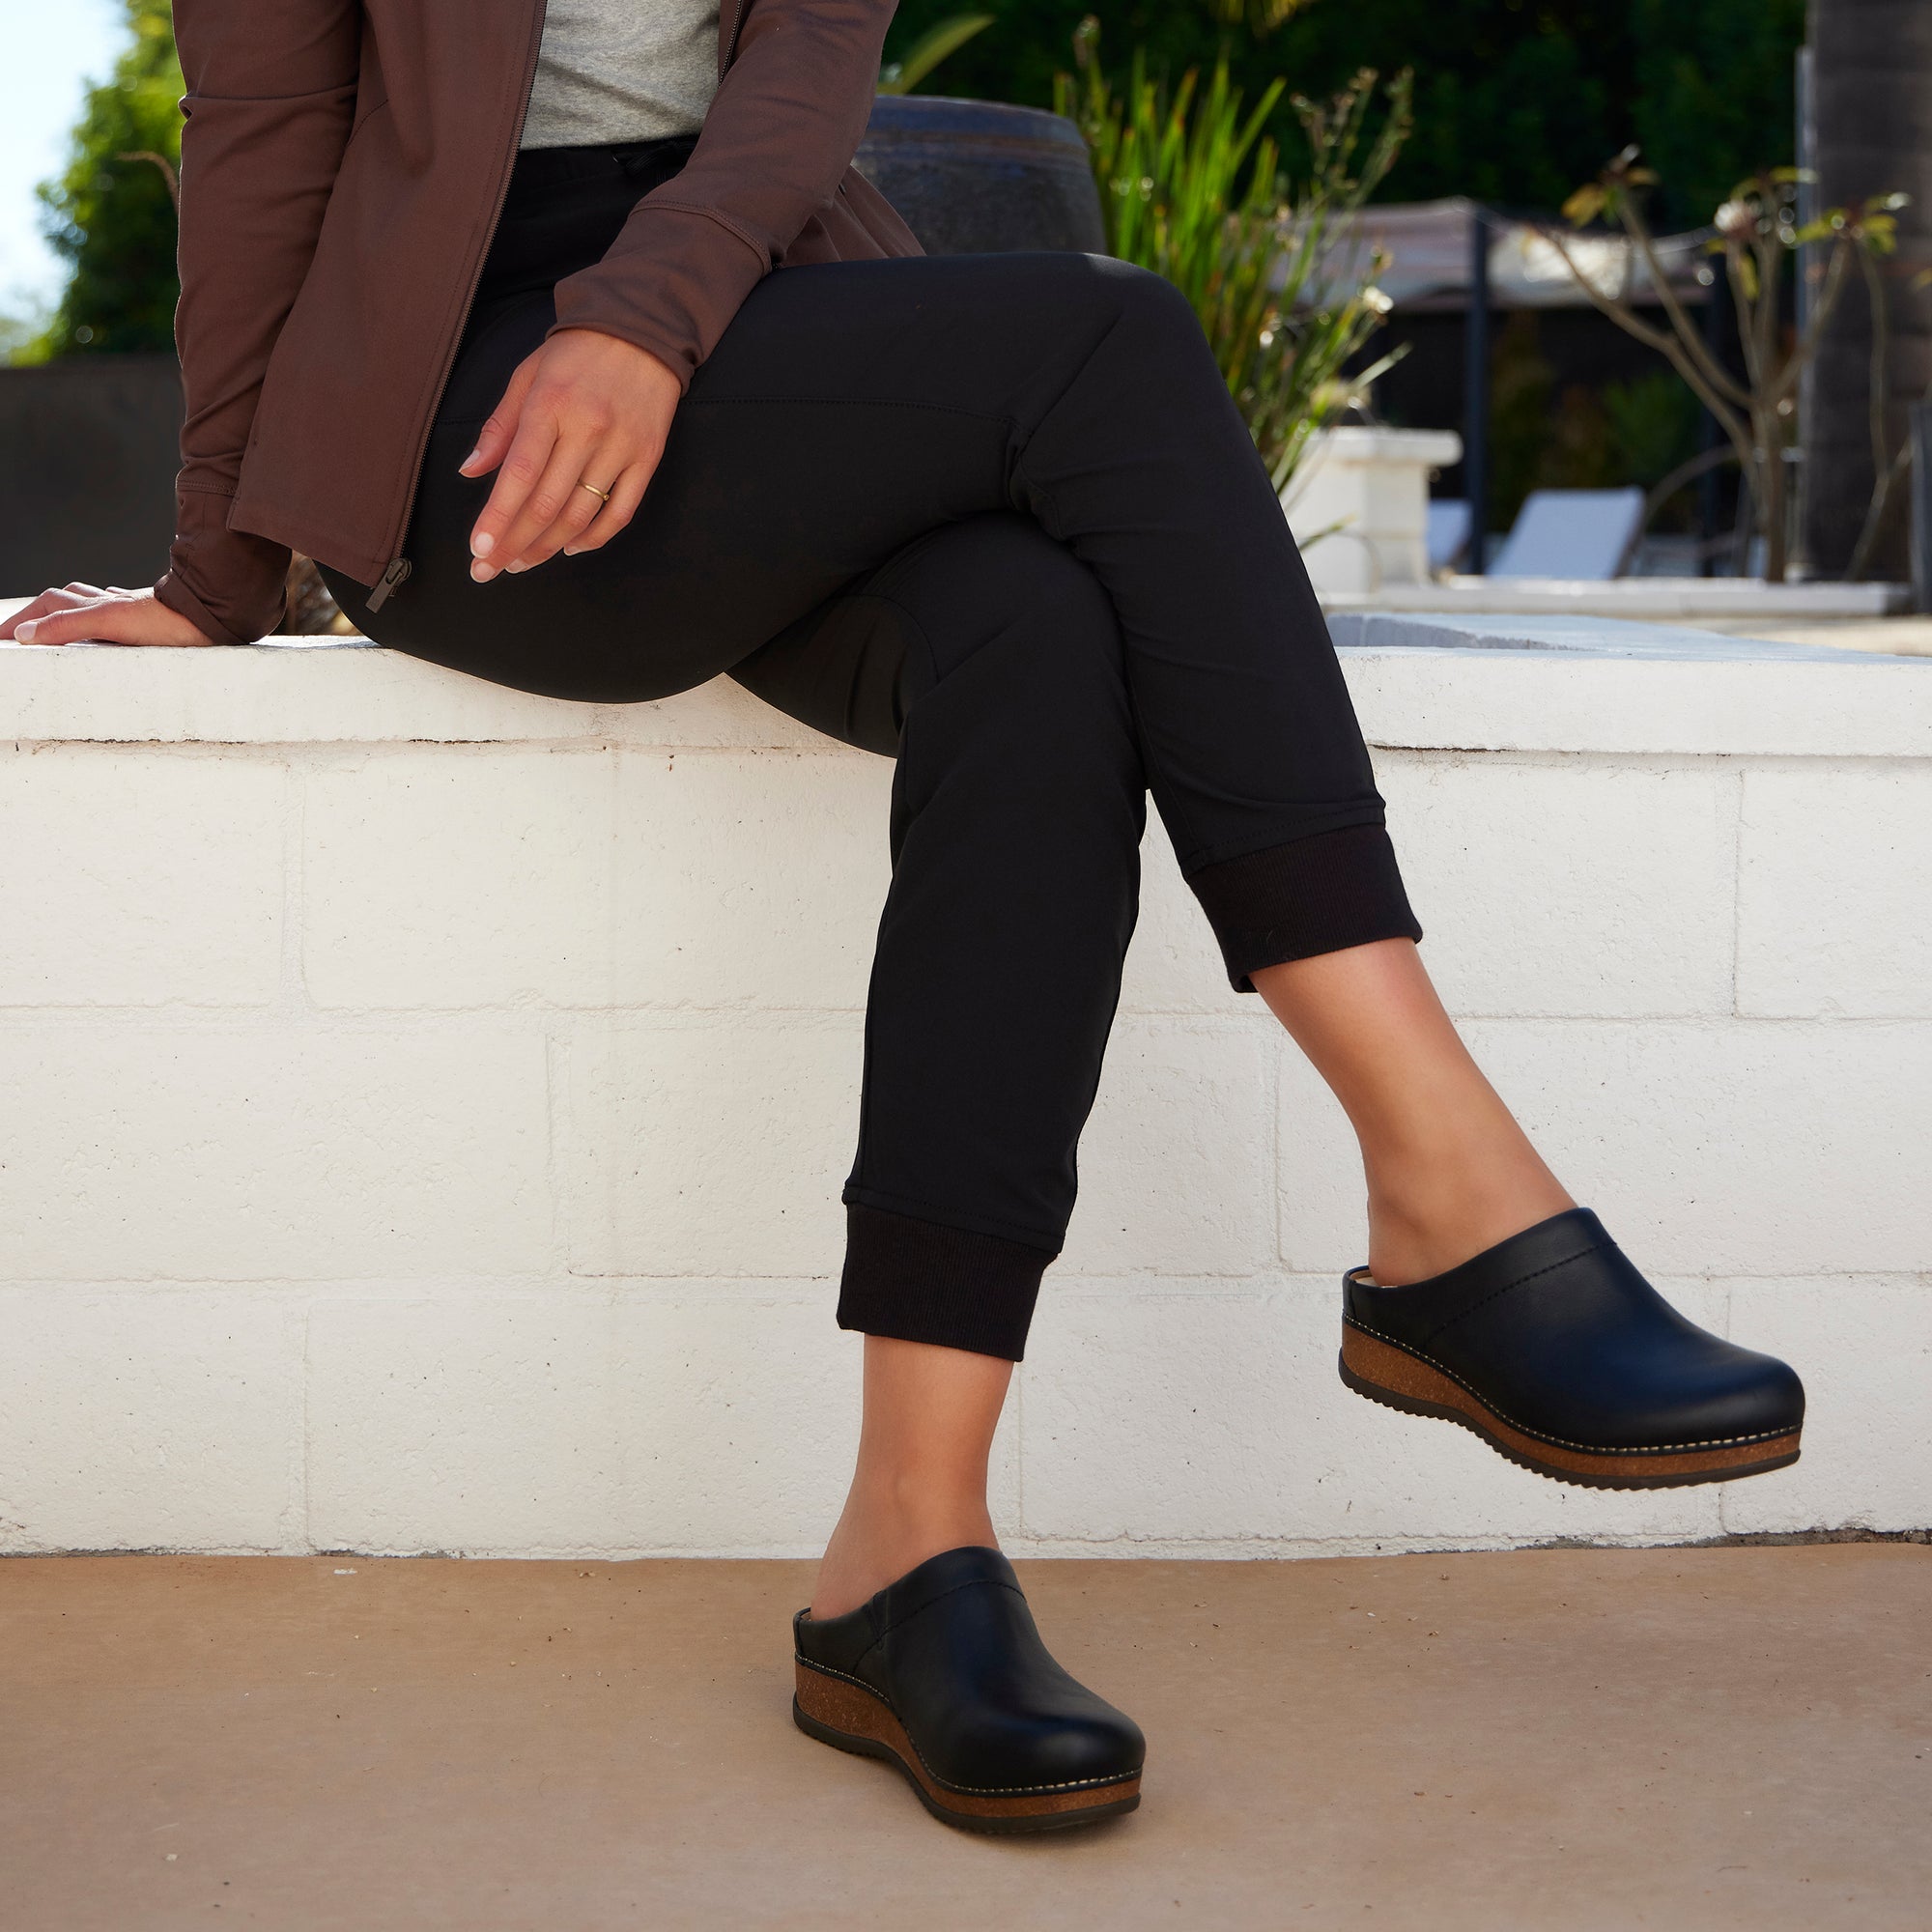 Woman in a stylish outfit wearing black mule clogs with cork-based sole.